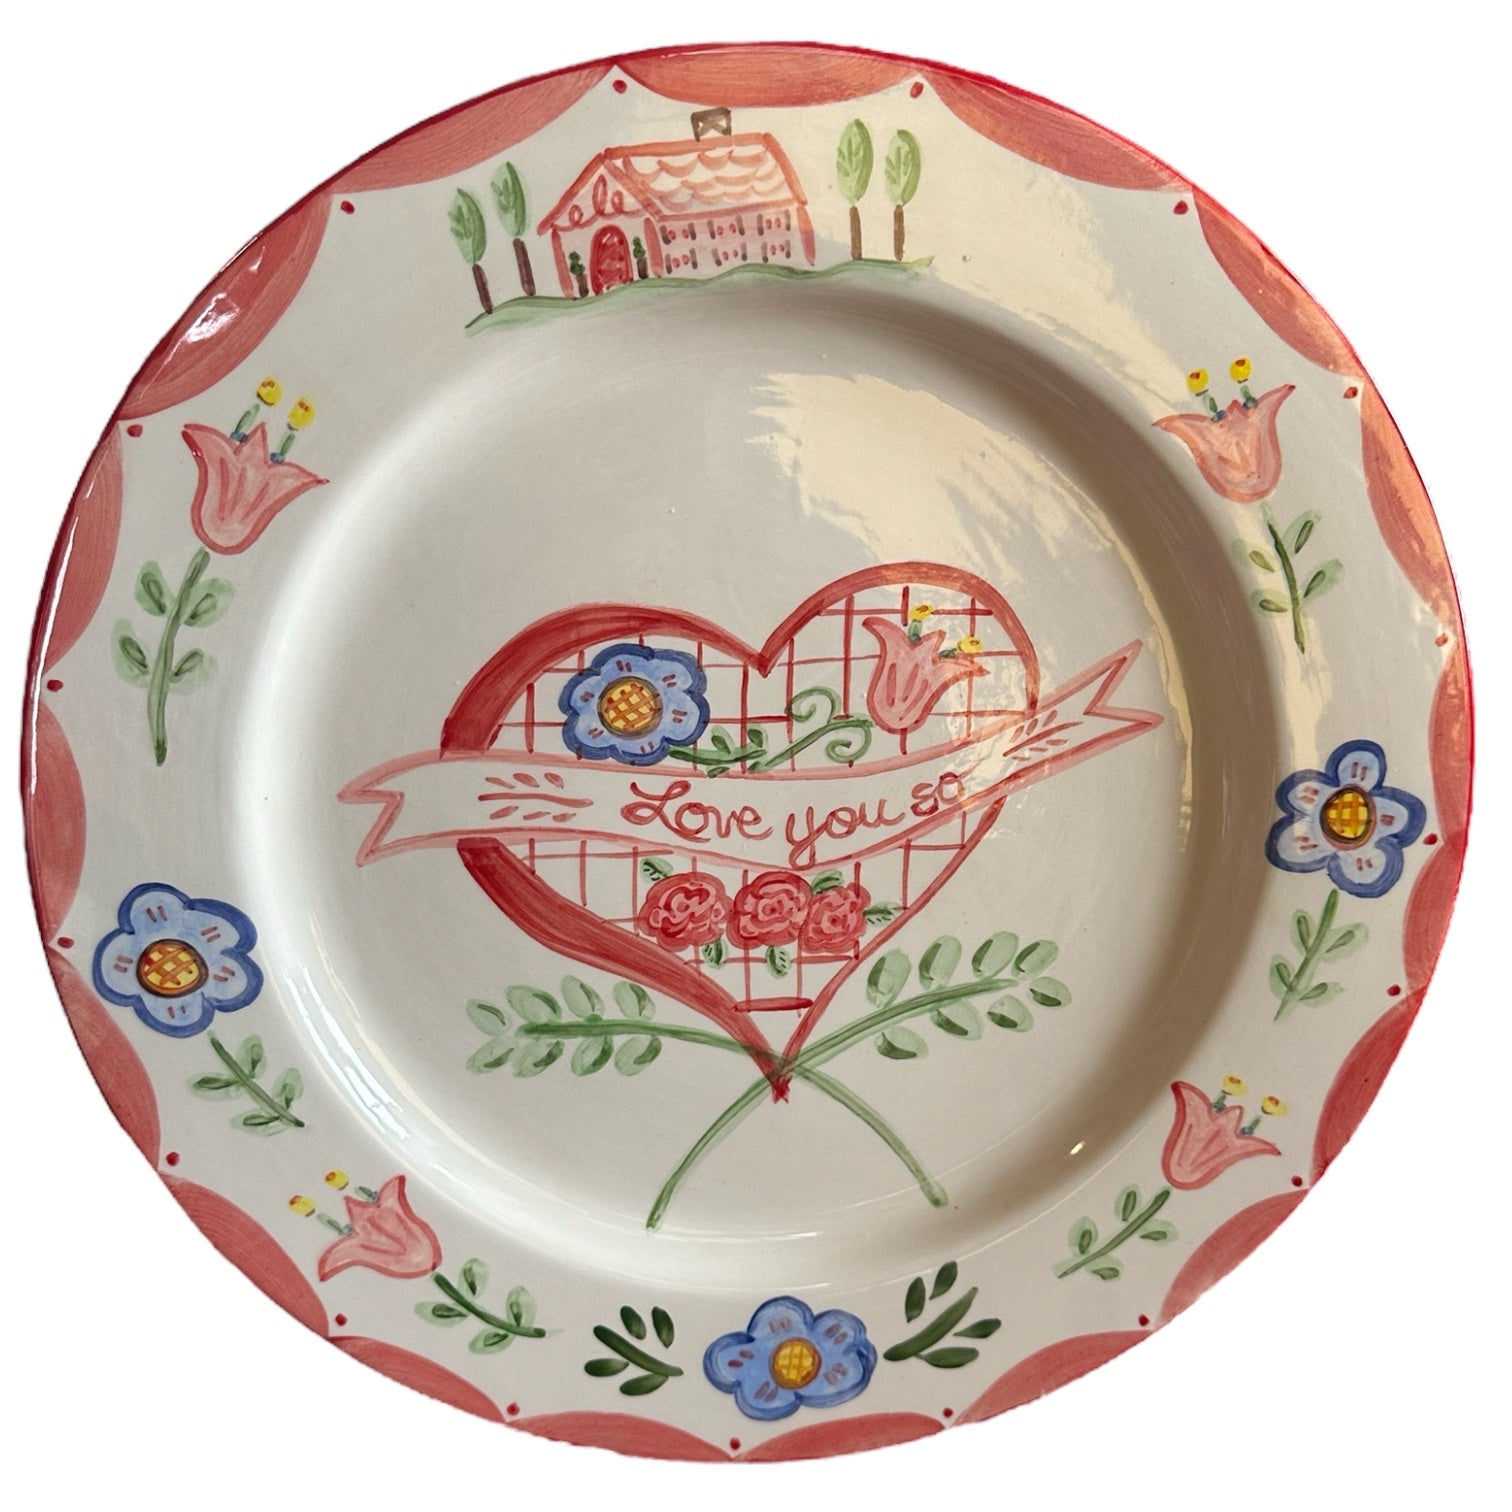 Love You So Platter - Premium Platter from Tricia Lowenfield Design 